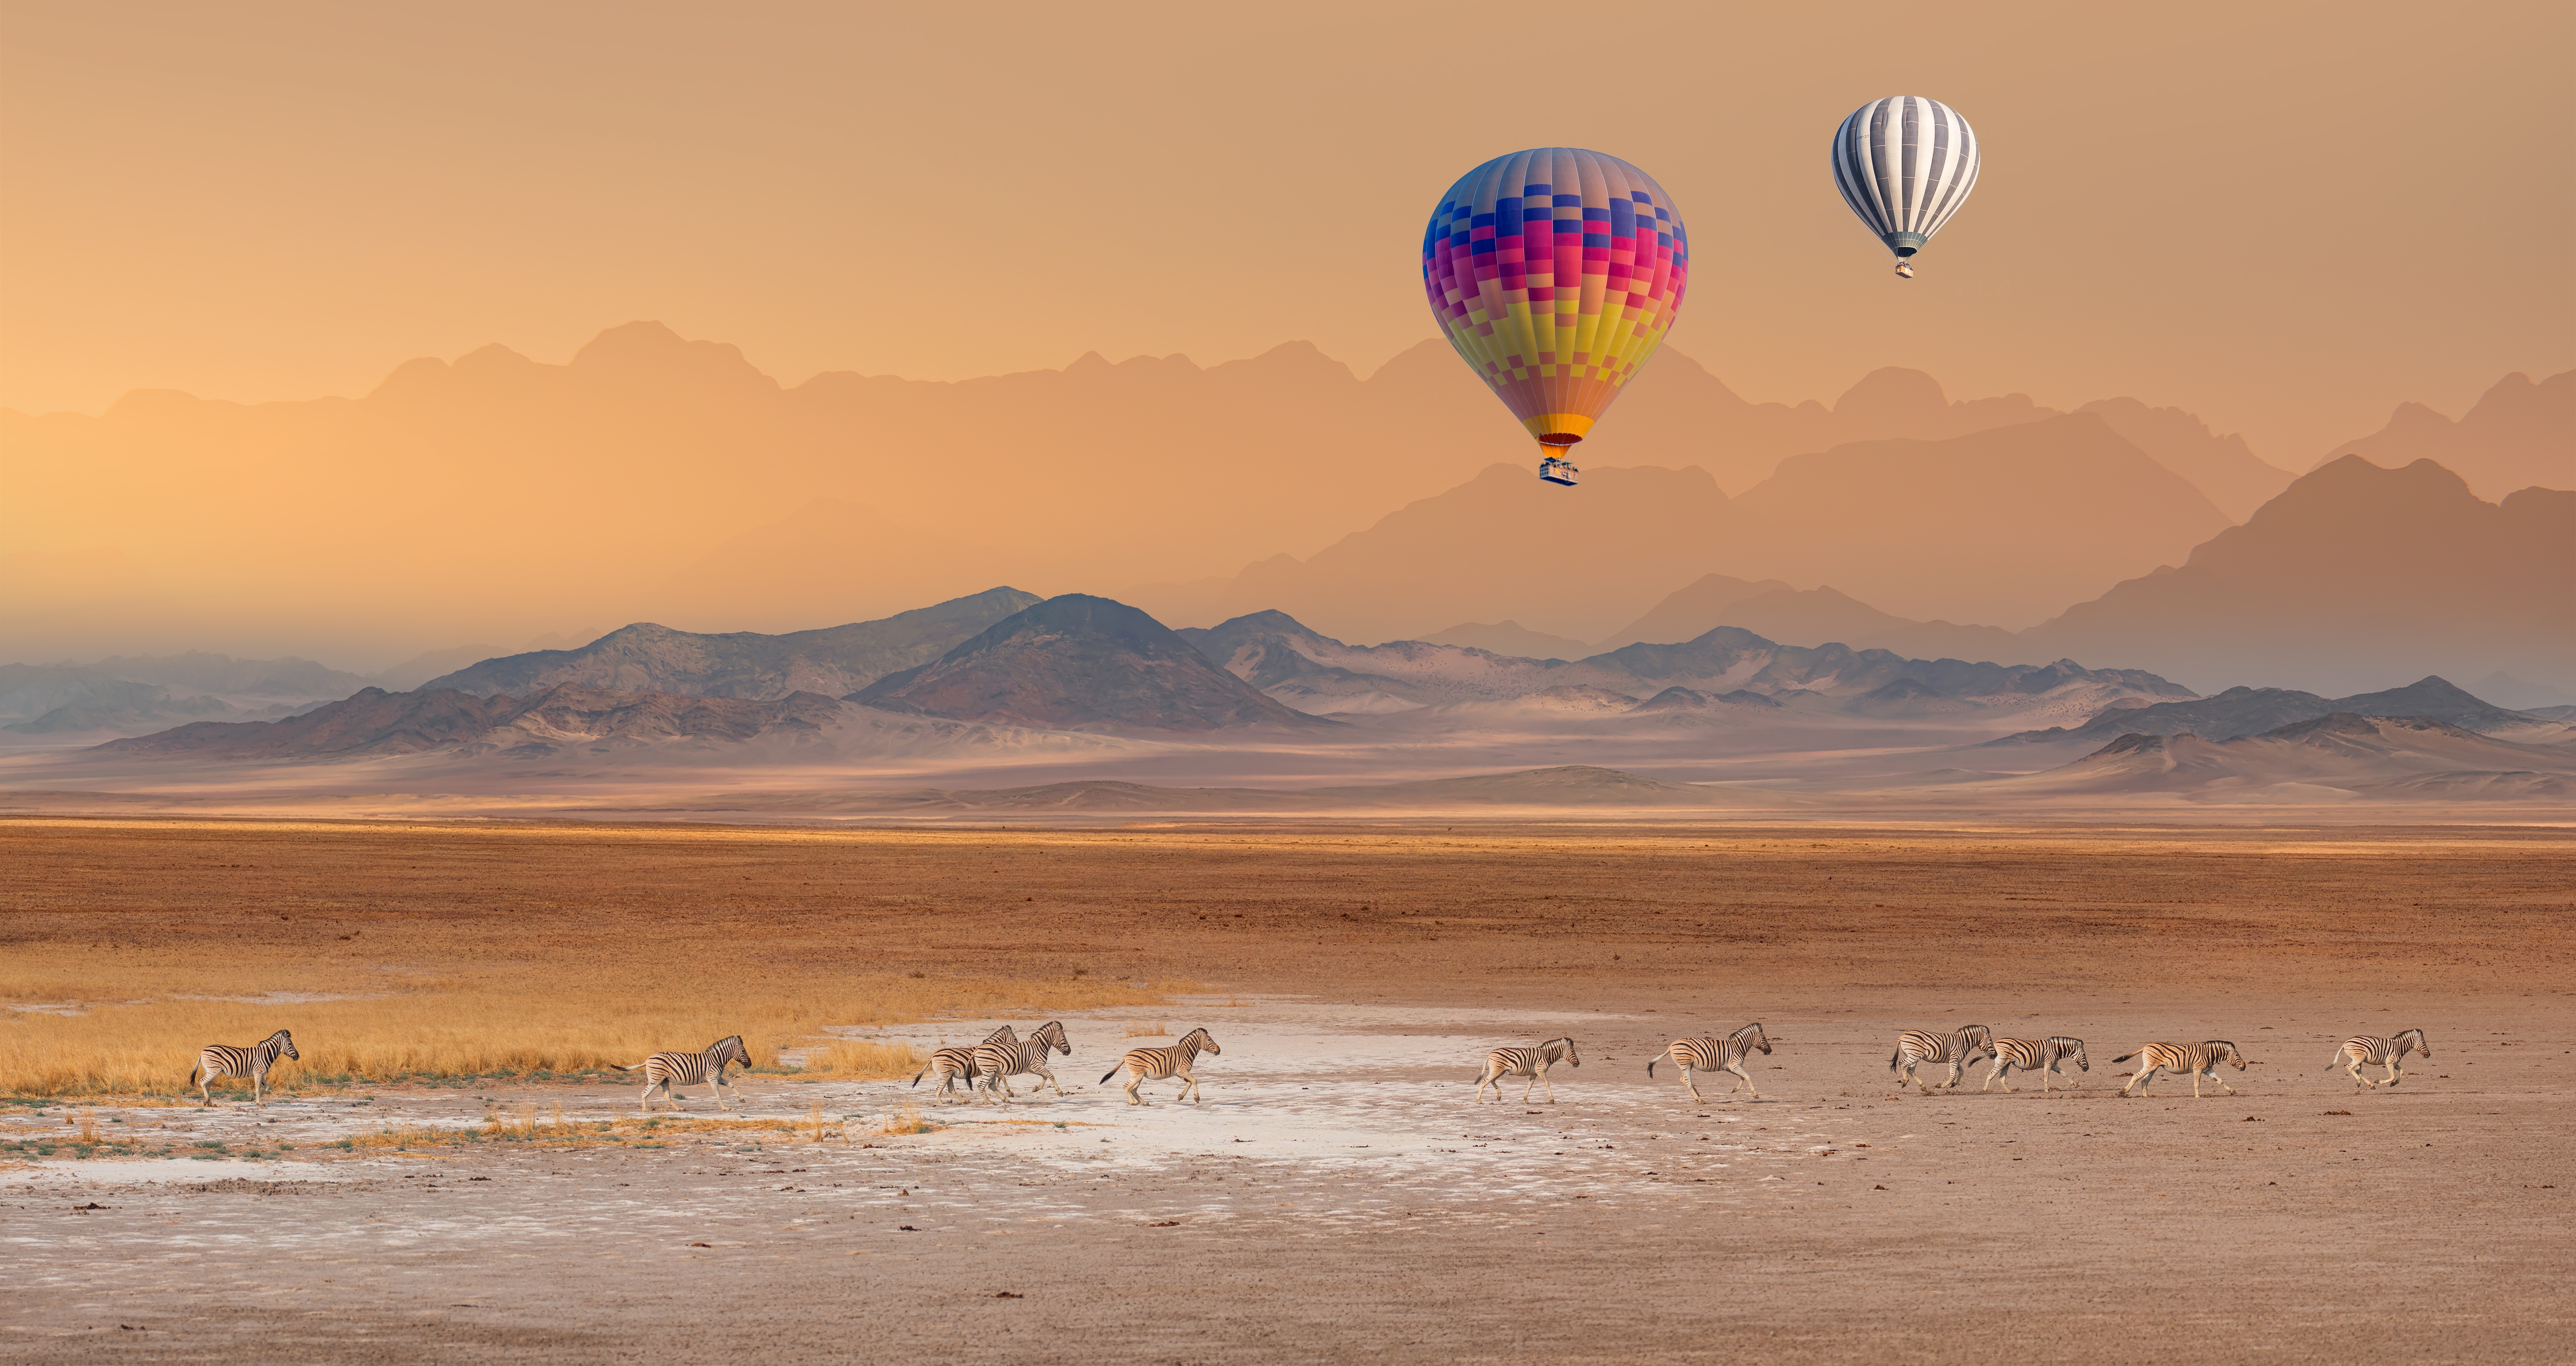 A hot air balloons flying over the African Savanna | Source: Shutterstock